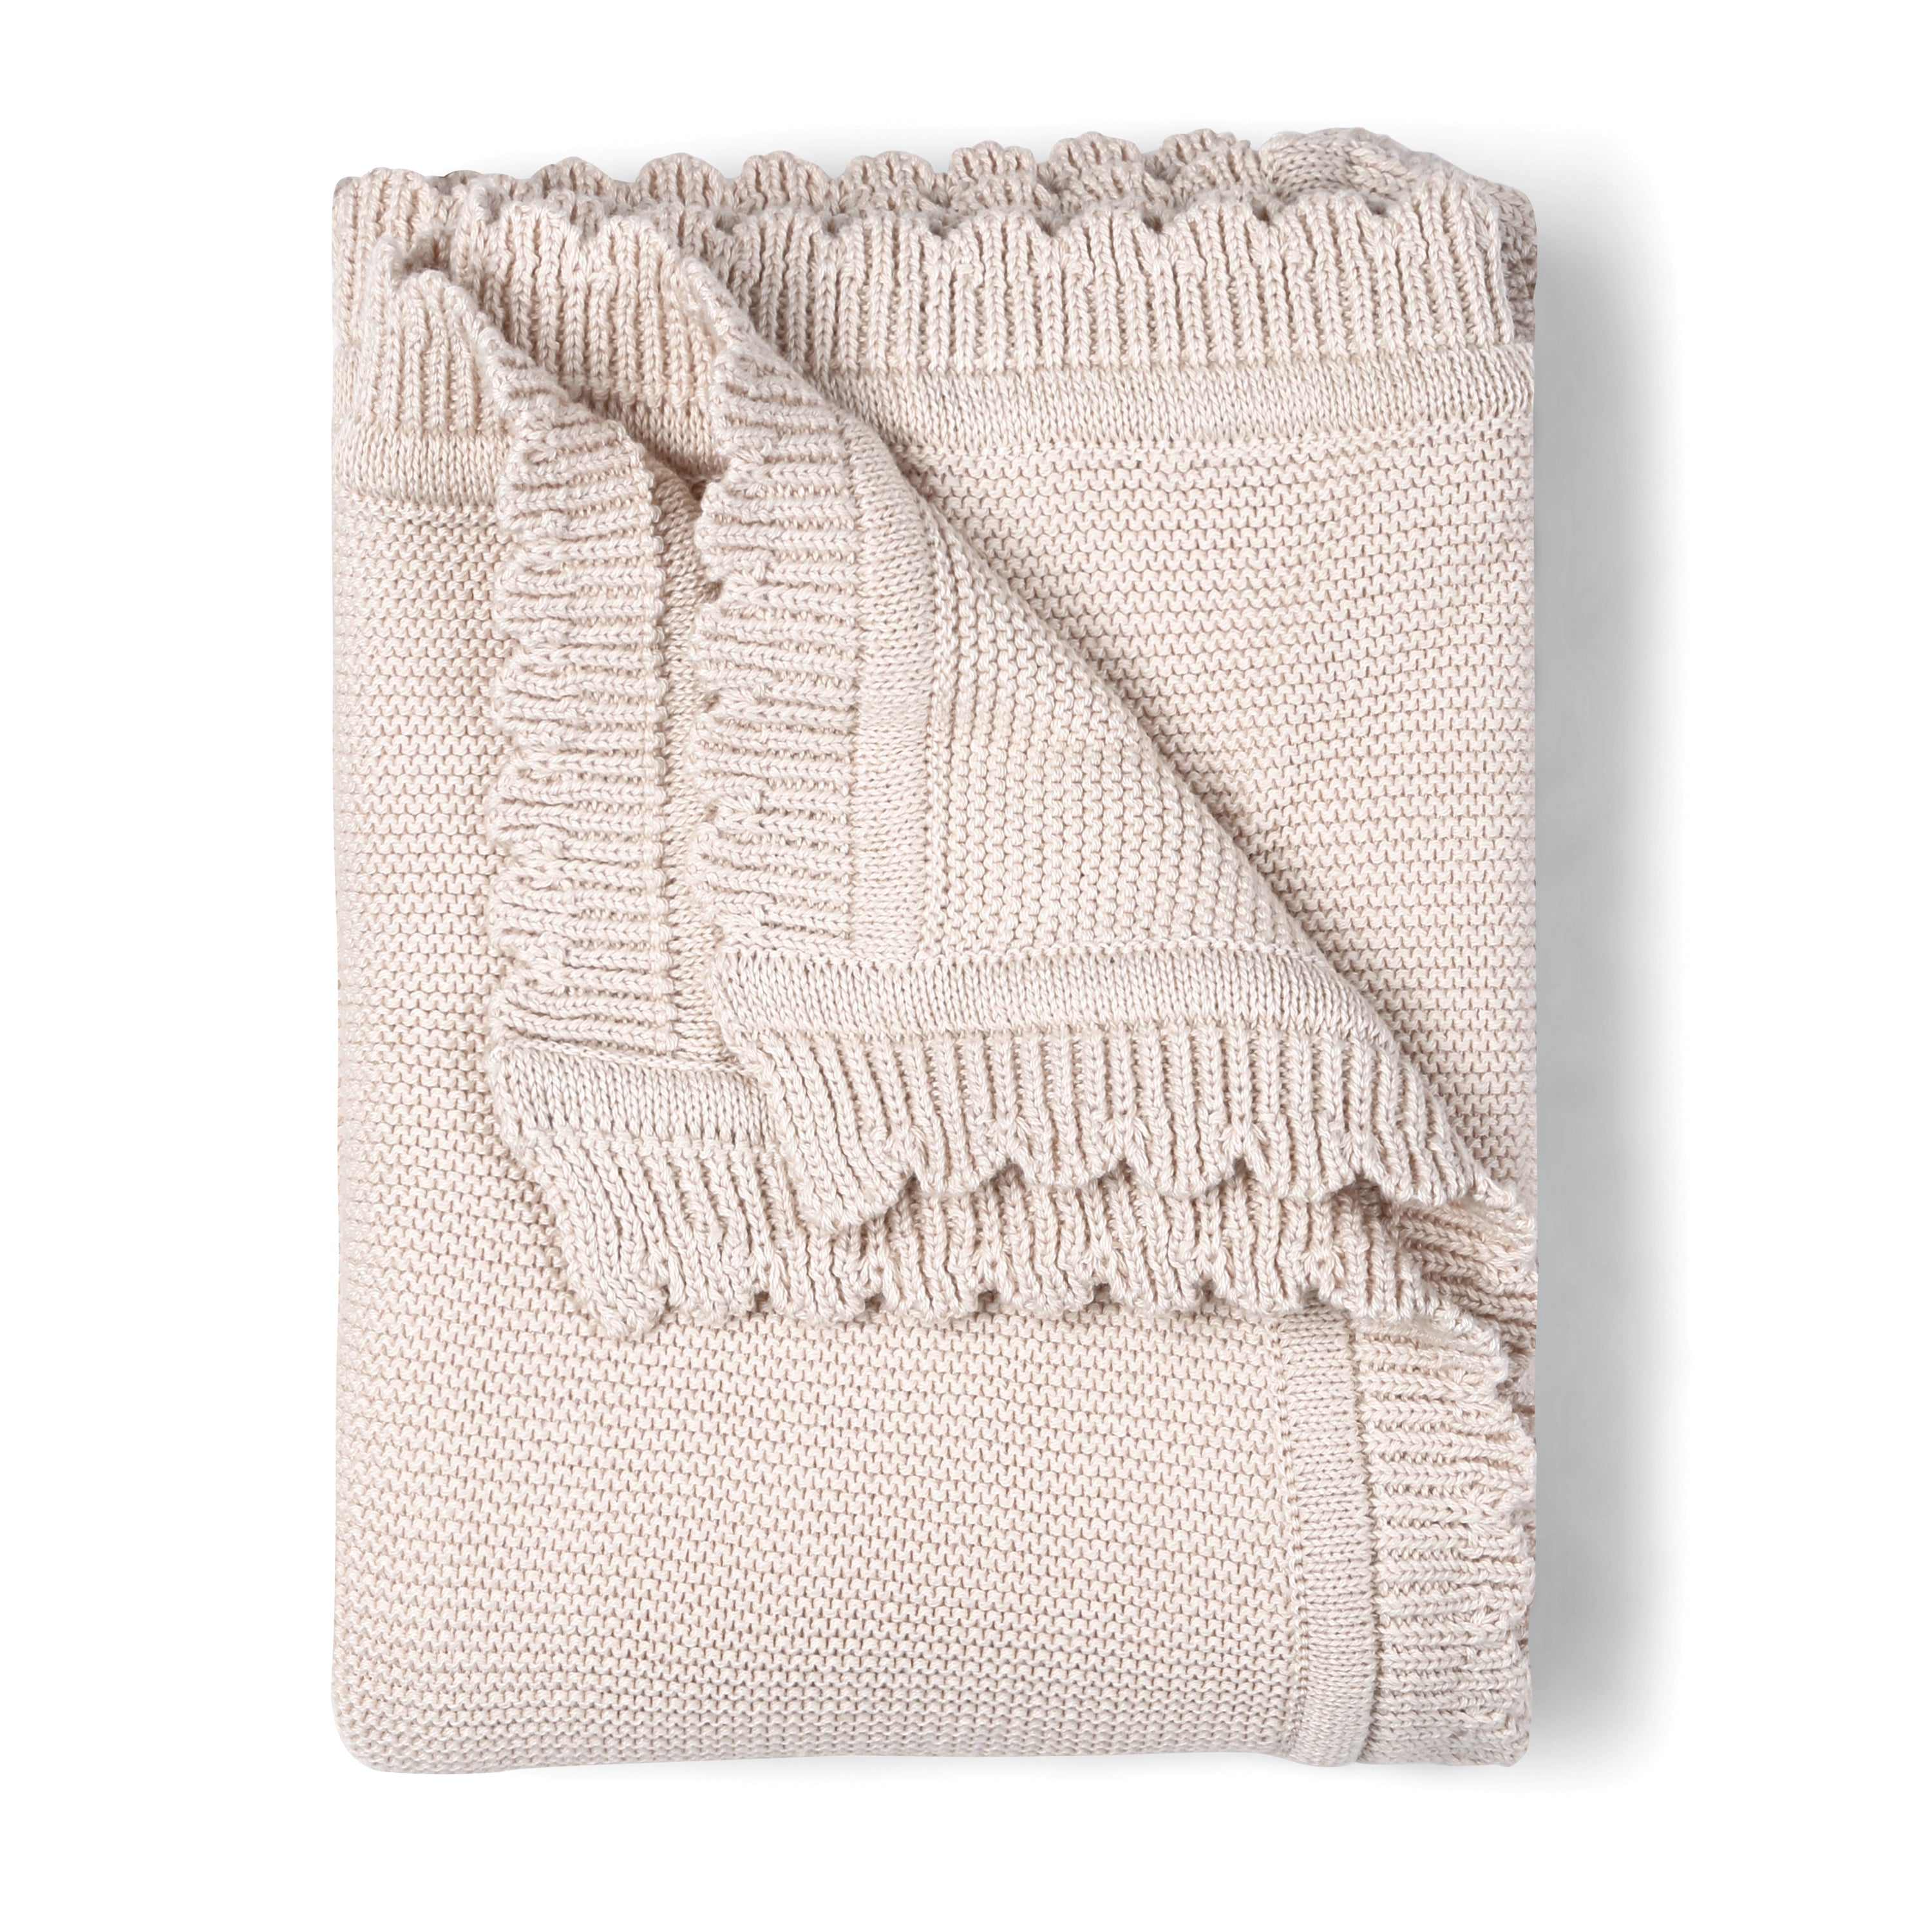 A neatly folded Organic Cotton Scalloped Baby Blanket in Nora Shell, from Makemake Organics, with a textured pattern and fringed edges, isolated on a white background.